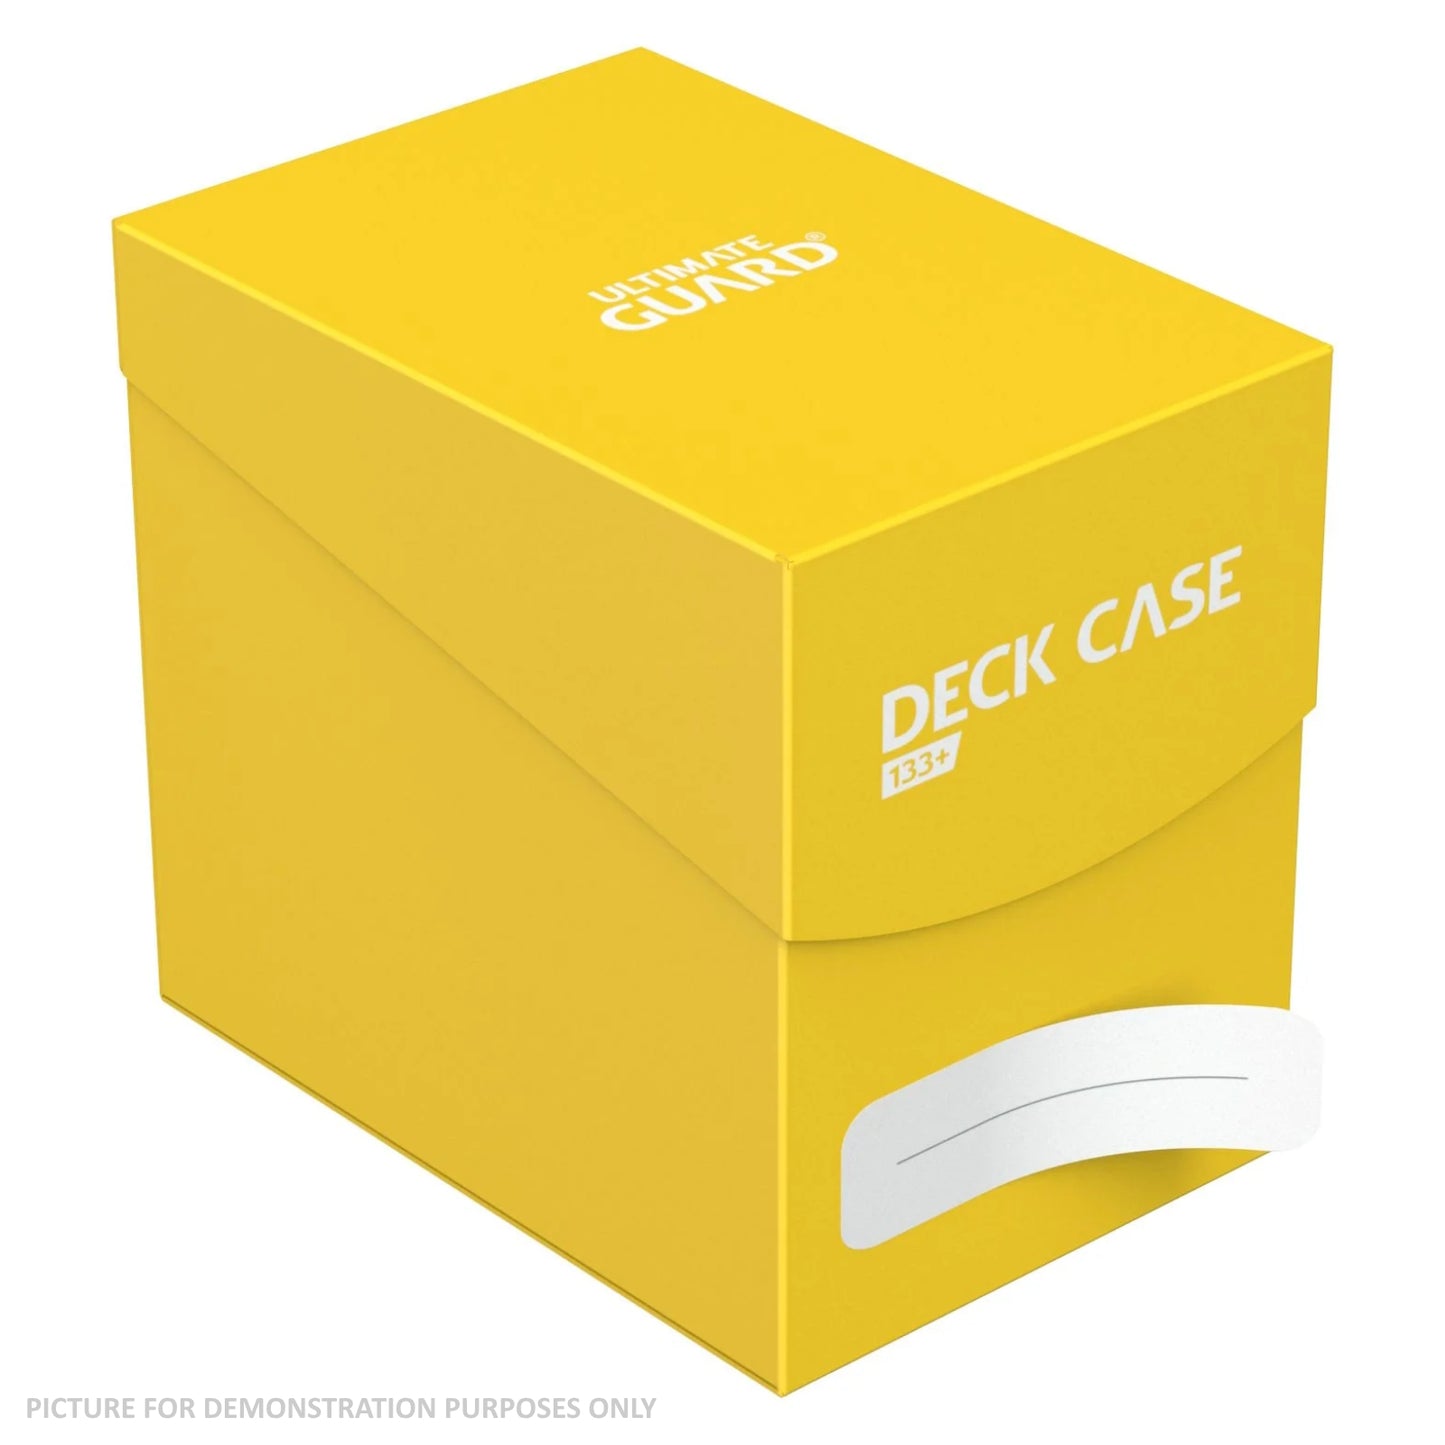 Ultimate Guard Deck Case 133+ YELLOW